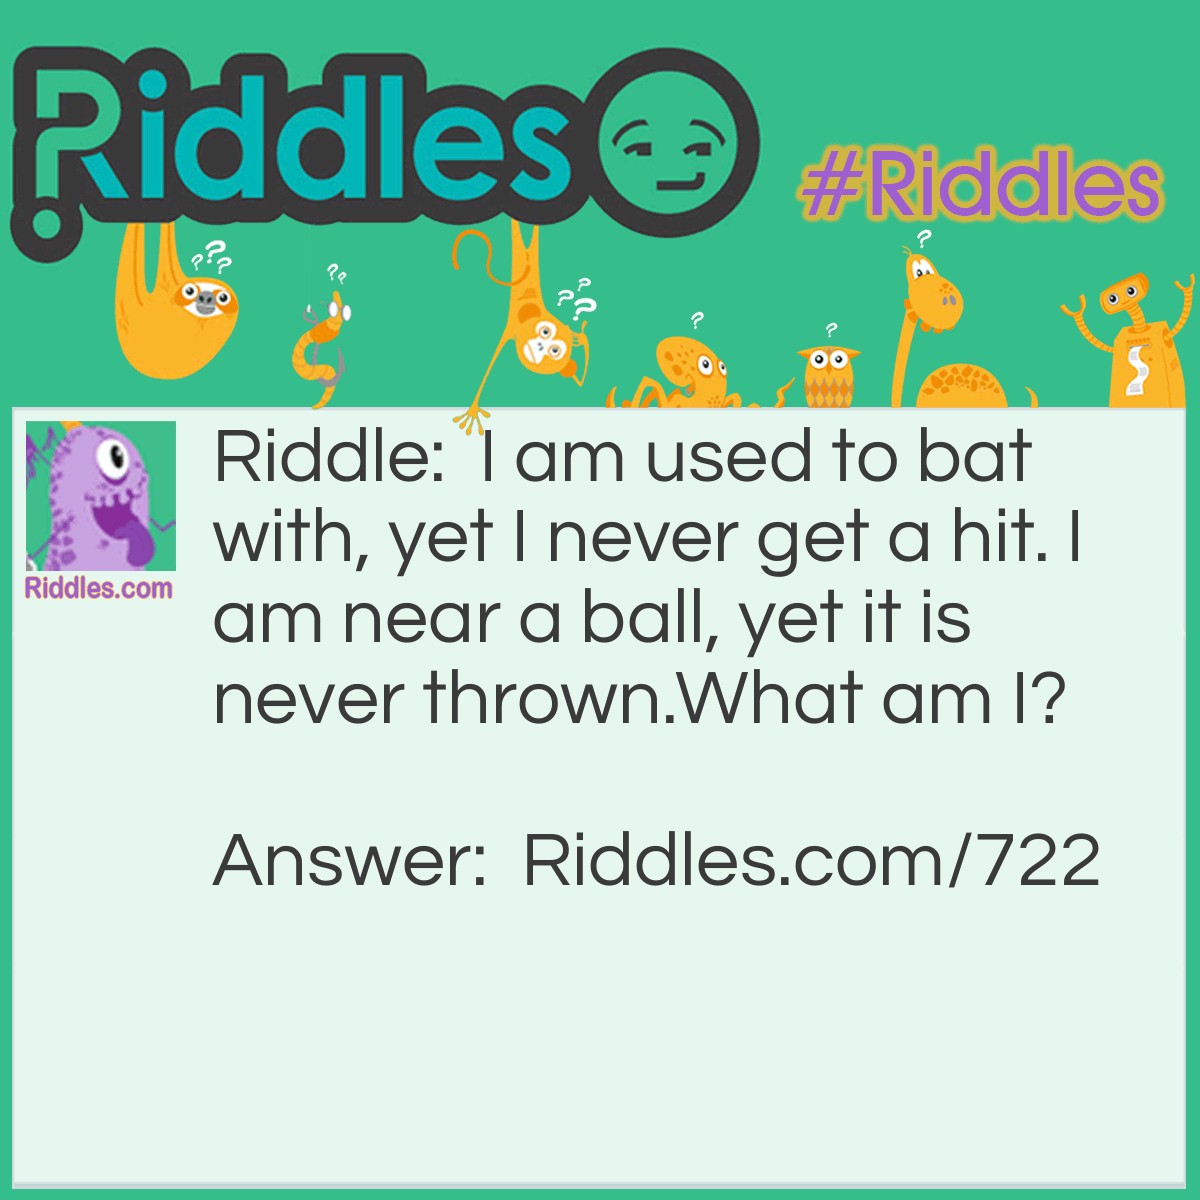 Riddle: I am used to bat with, yet I never get a hit. I am near a ball, yet it is never thrown.
What am I? Answer: Your Eyelashes!